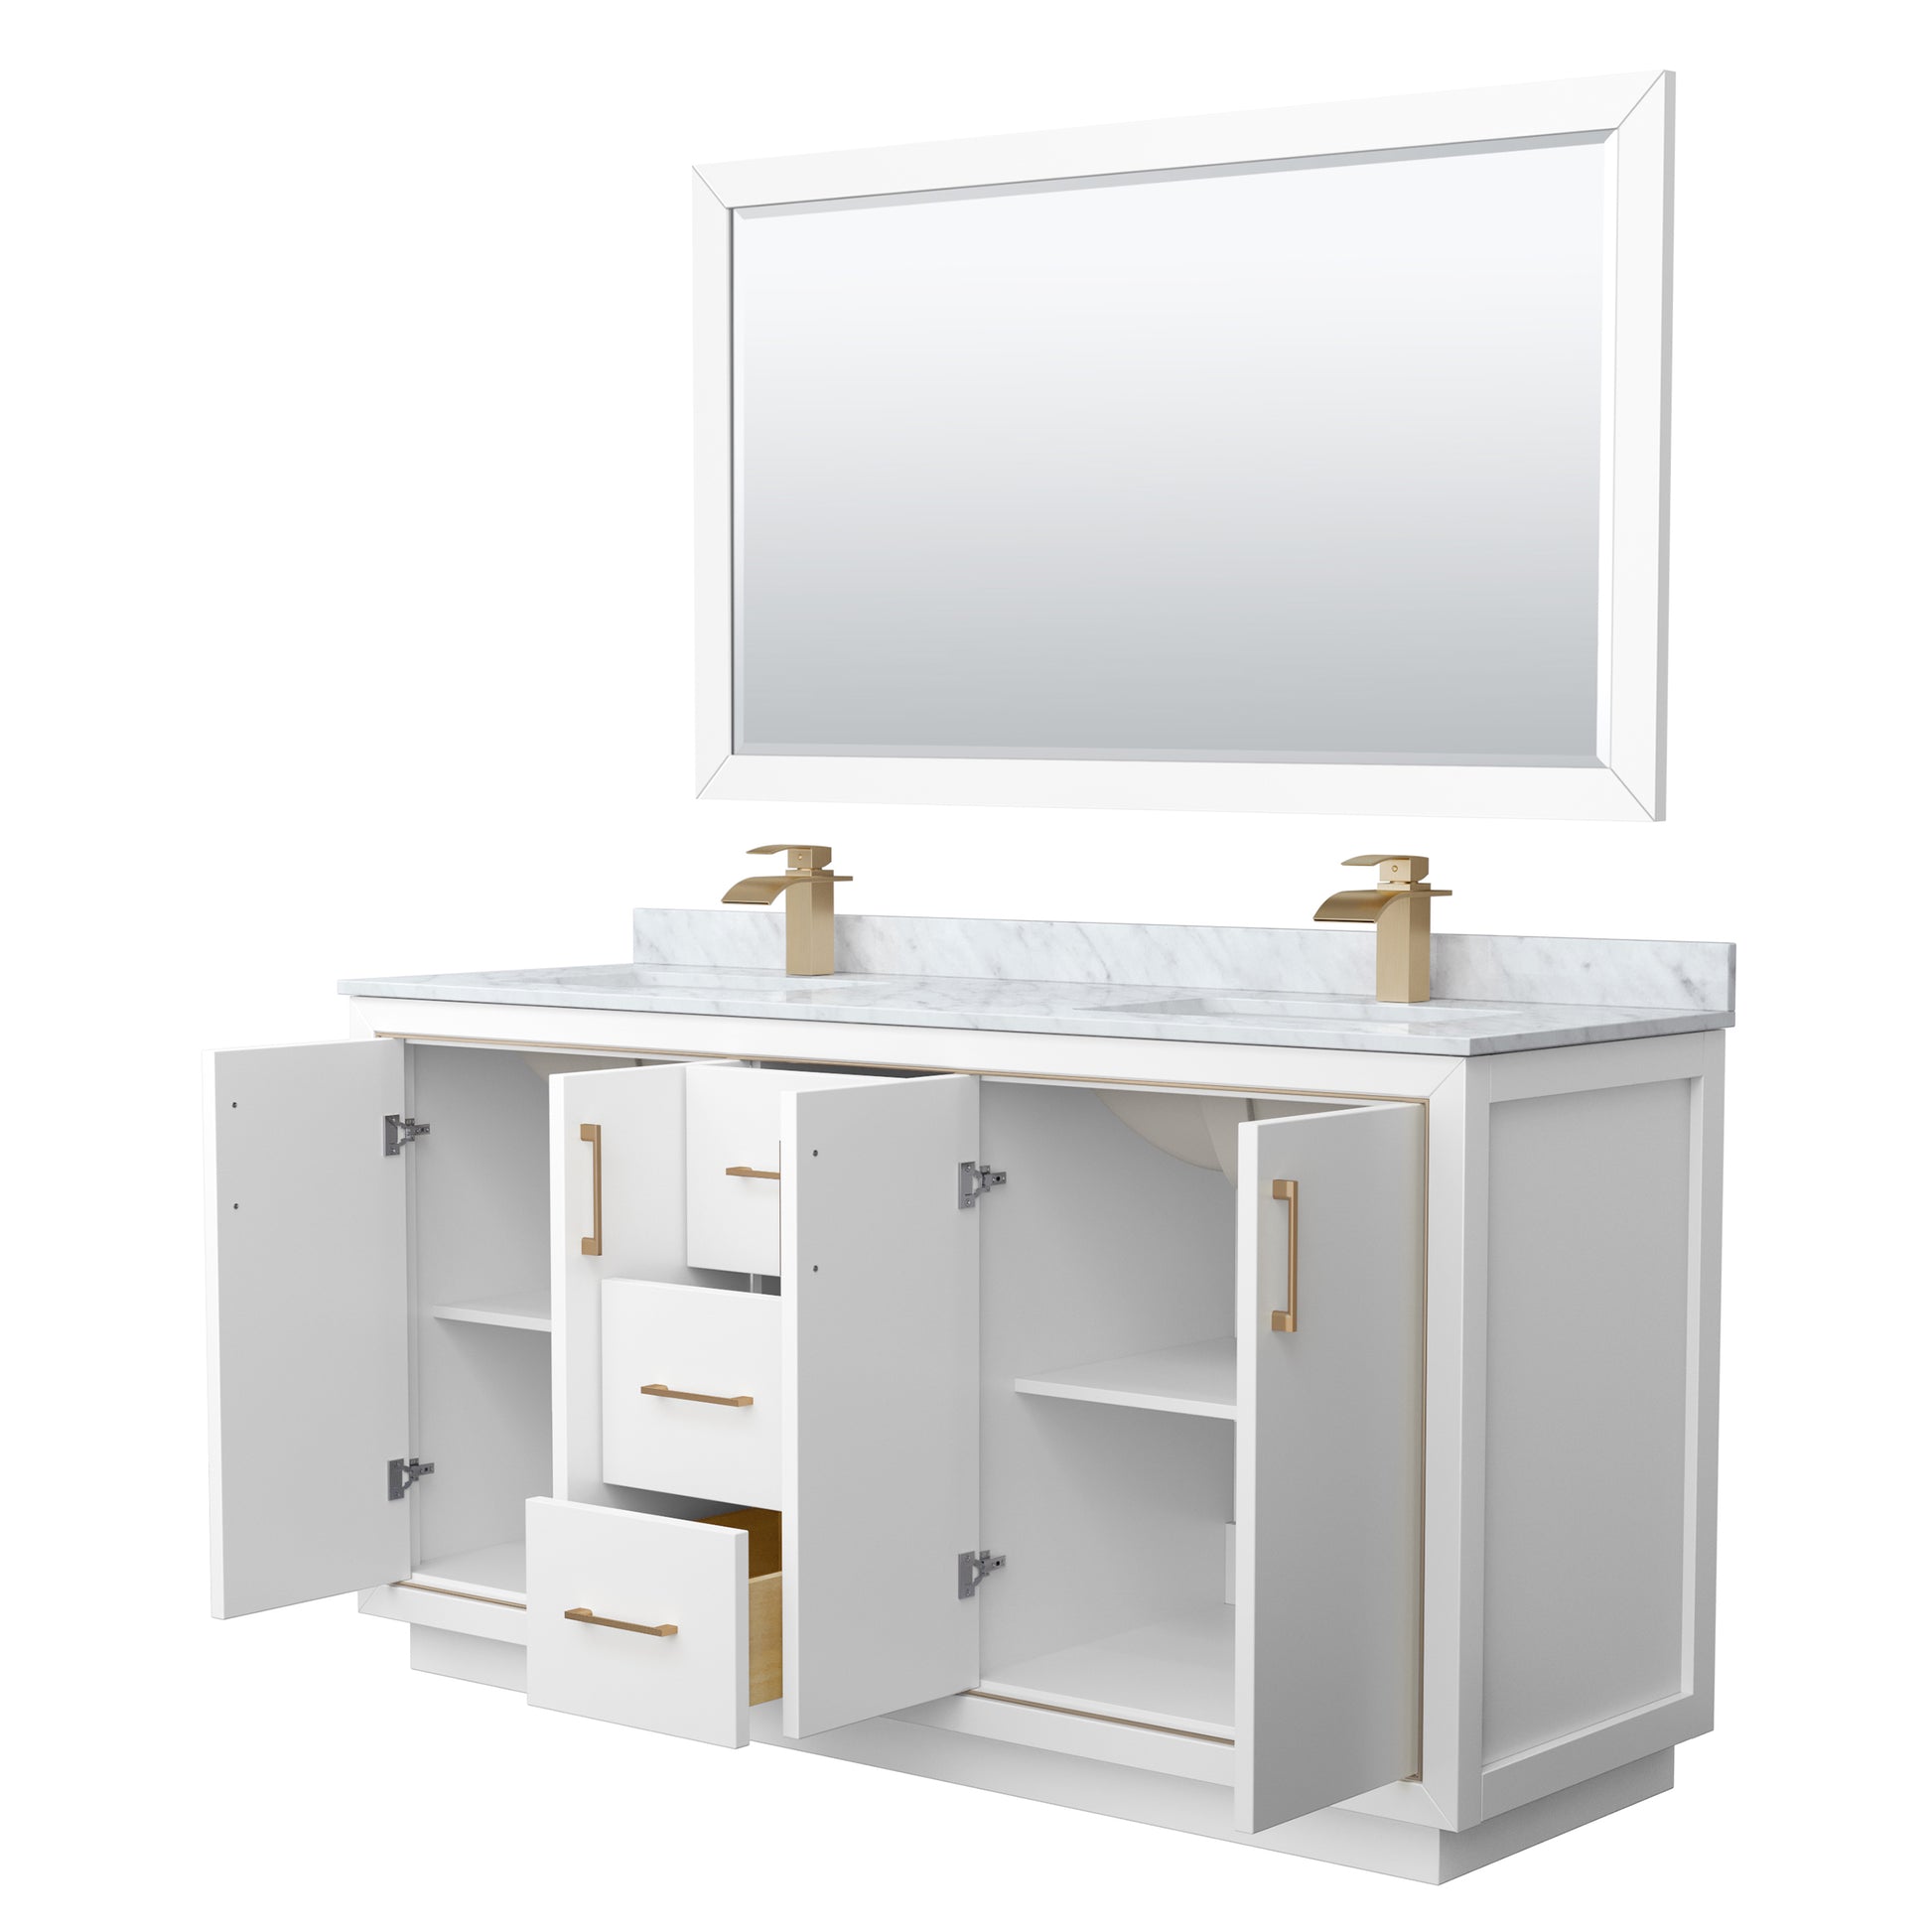 
  
  Icon Double Sink Vanity with White Carrara Marble Countertop, Undermount Square Sink, Optional Trim and Mirror
  
